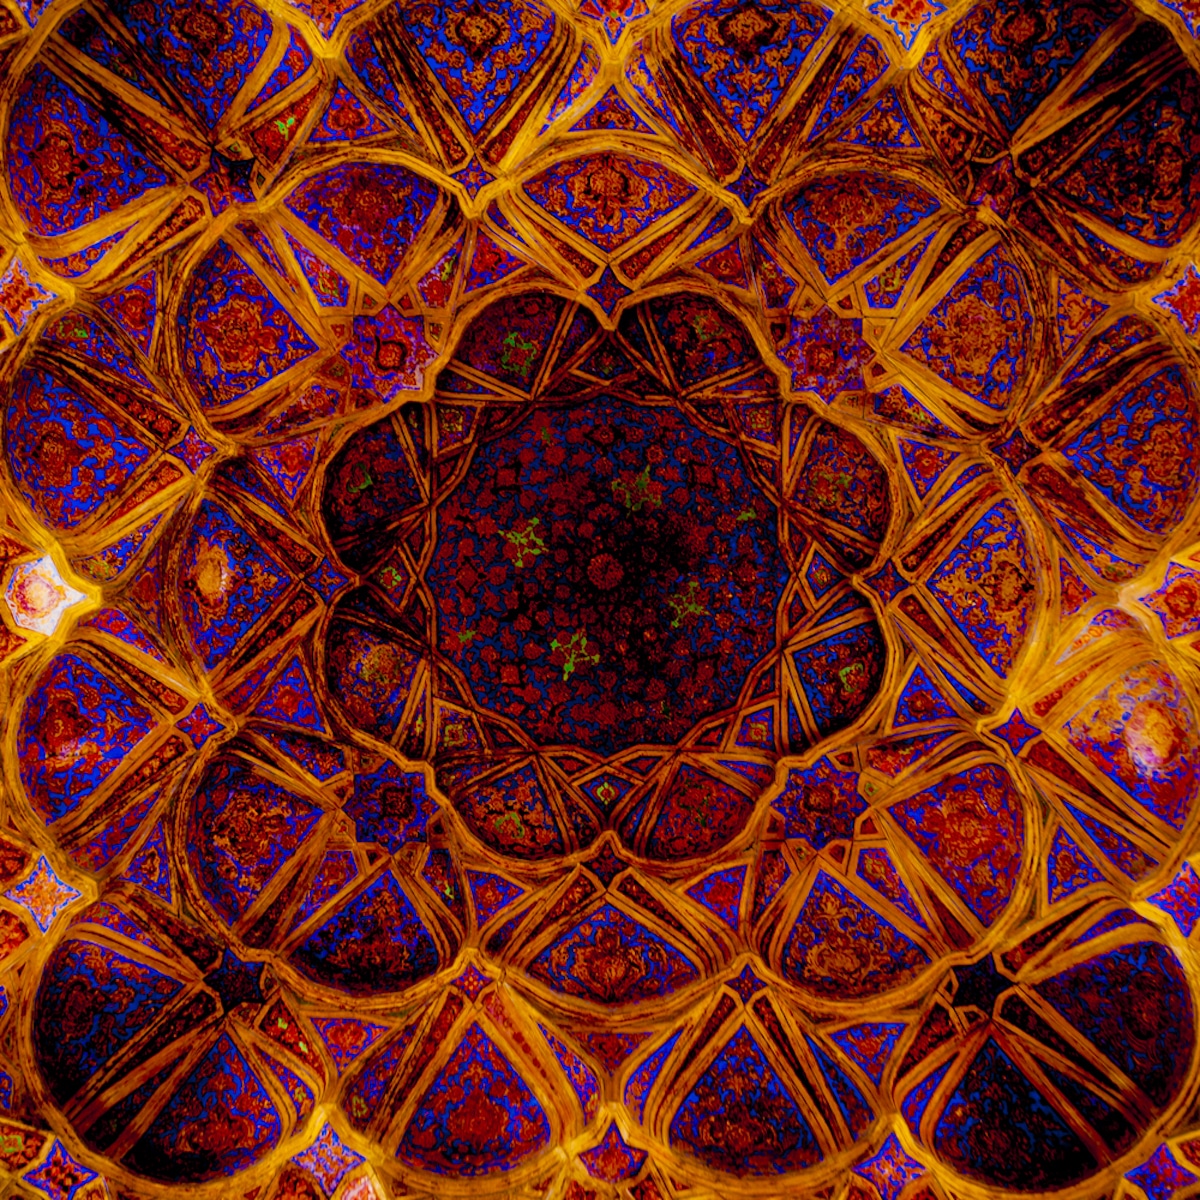 Isfahan Mosque Ceiling Photographed by James Longley